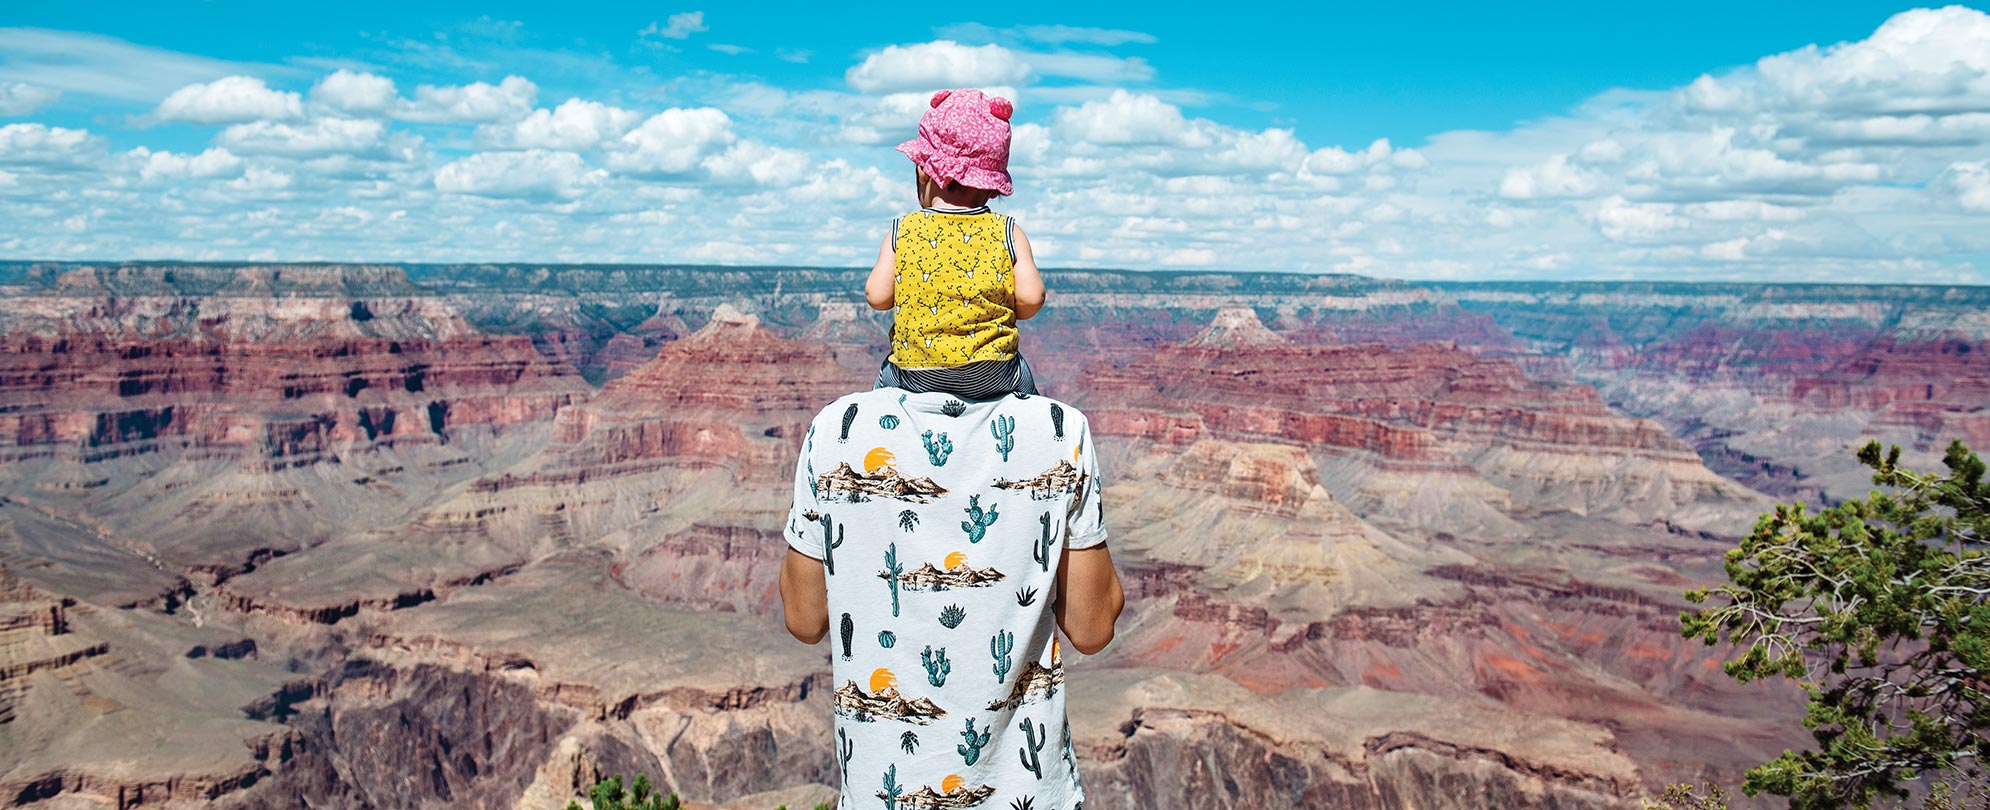 A dad carrying his child on his shoulders as they look out over the Grand Canyon.